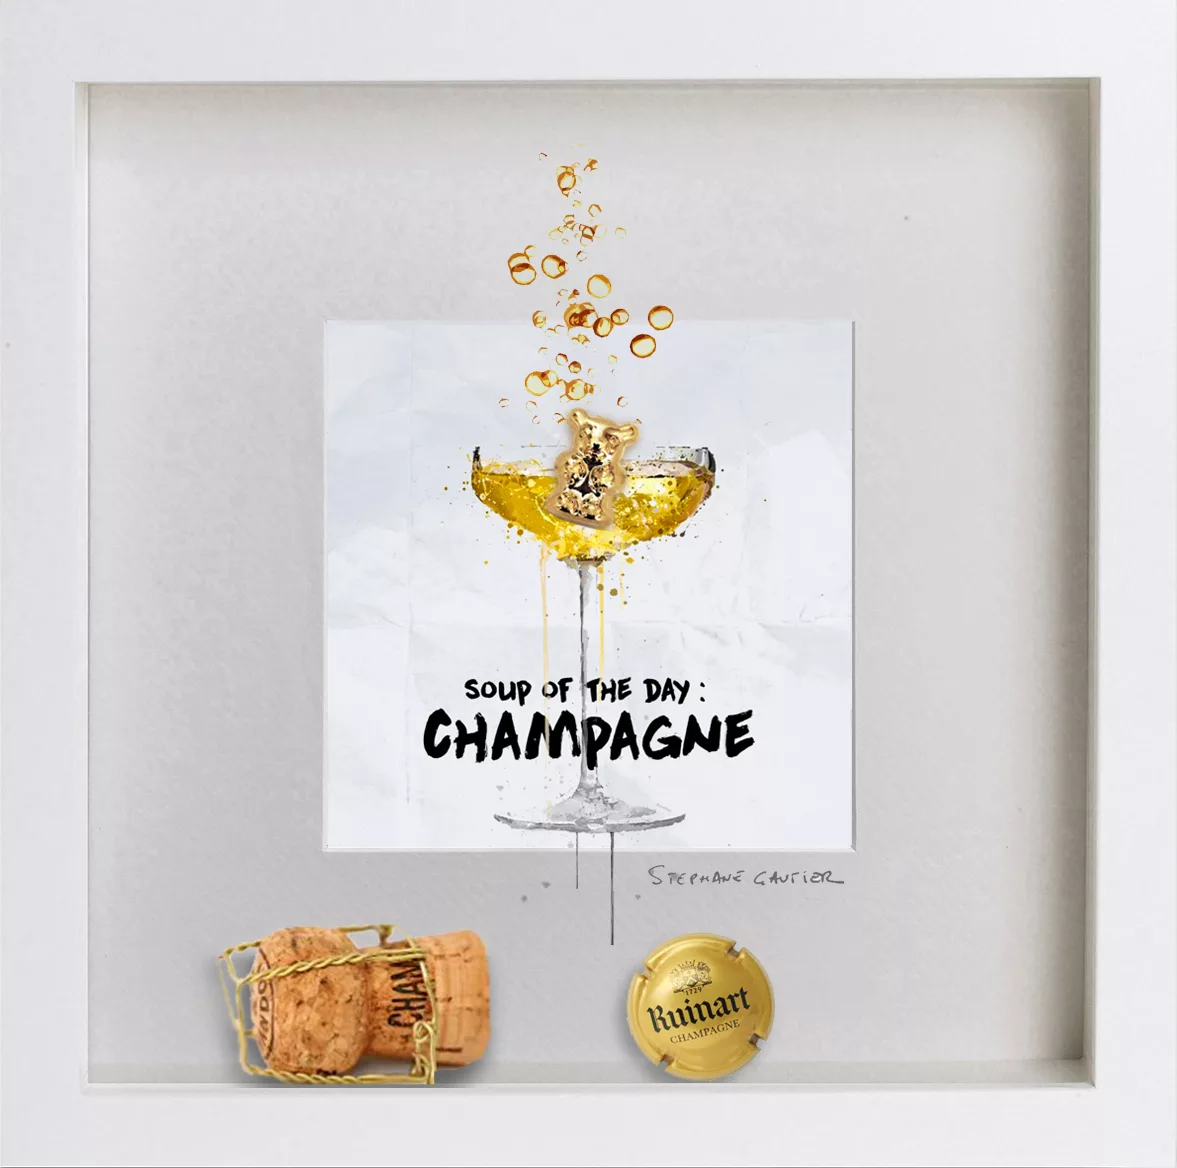 Mini collector Soup of the day Champagne, singular original artwork by Stéphane Gautier